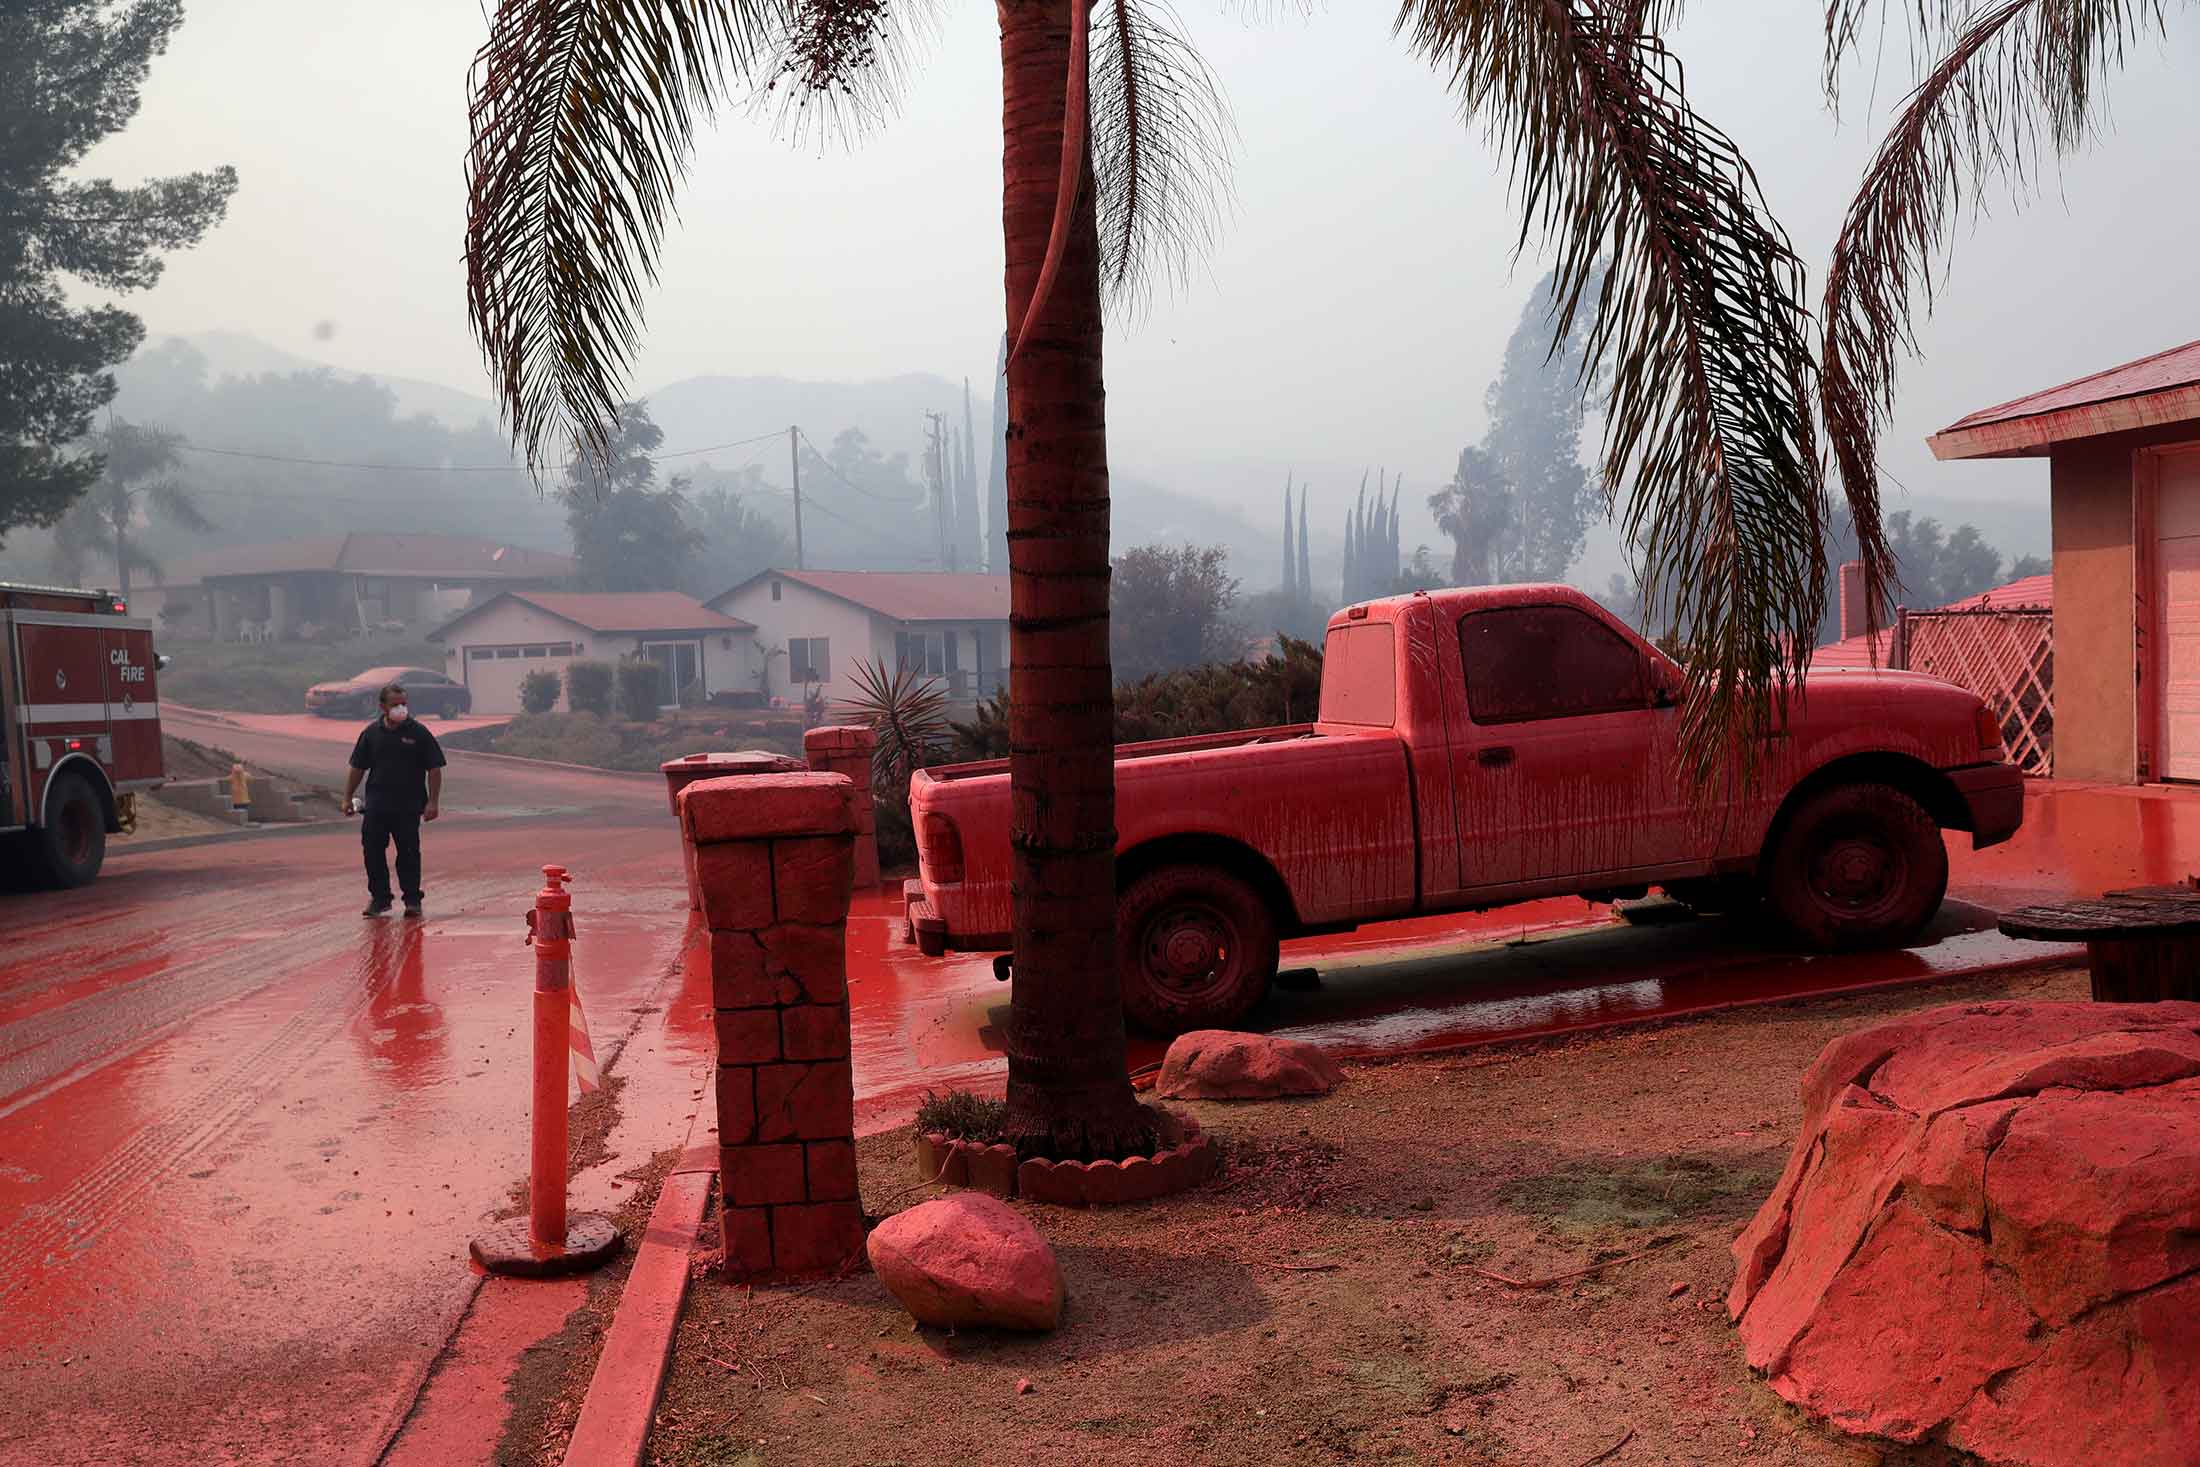 A neighborhood in Lake Elsinore, Calif., covered in fire retardant dropped by an air tanker.